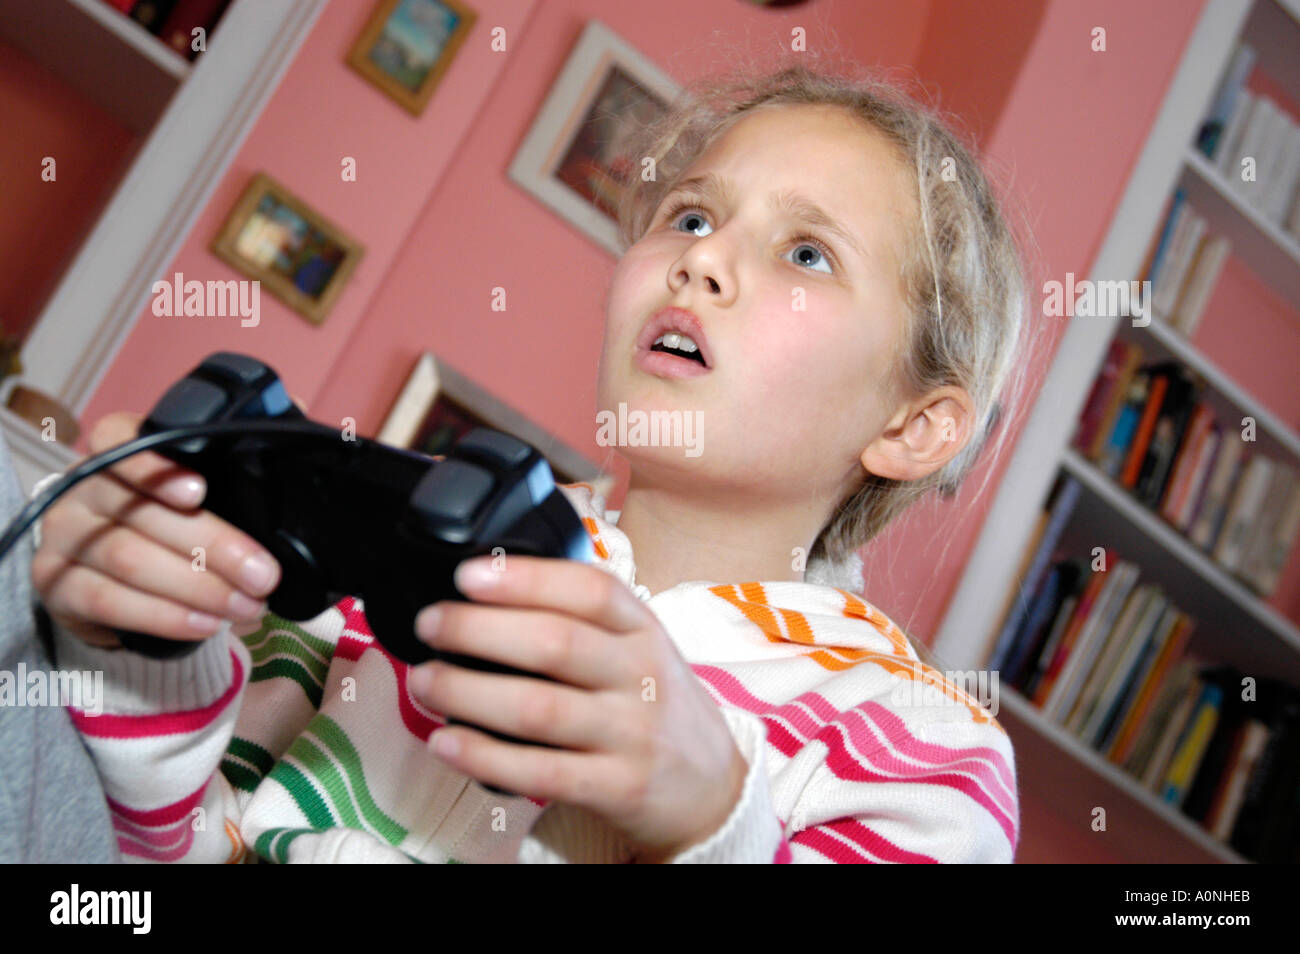 Young girl playing computer game on Sony Playstation console, England, UK Stock Photo